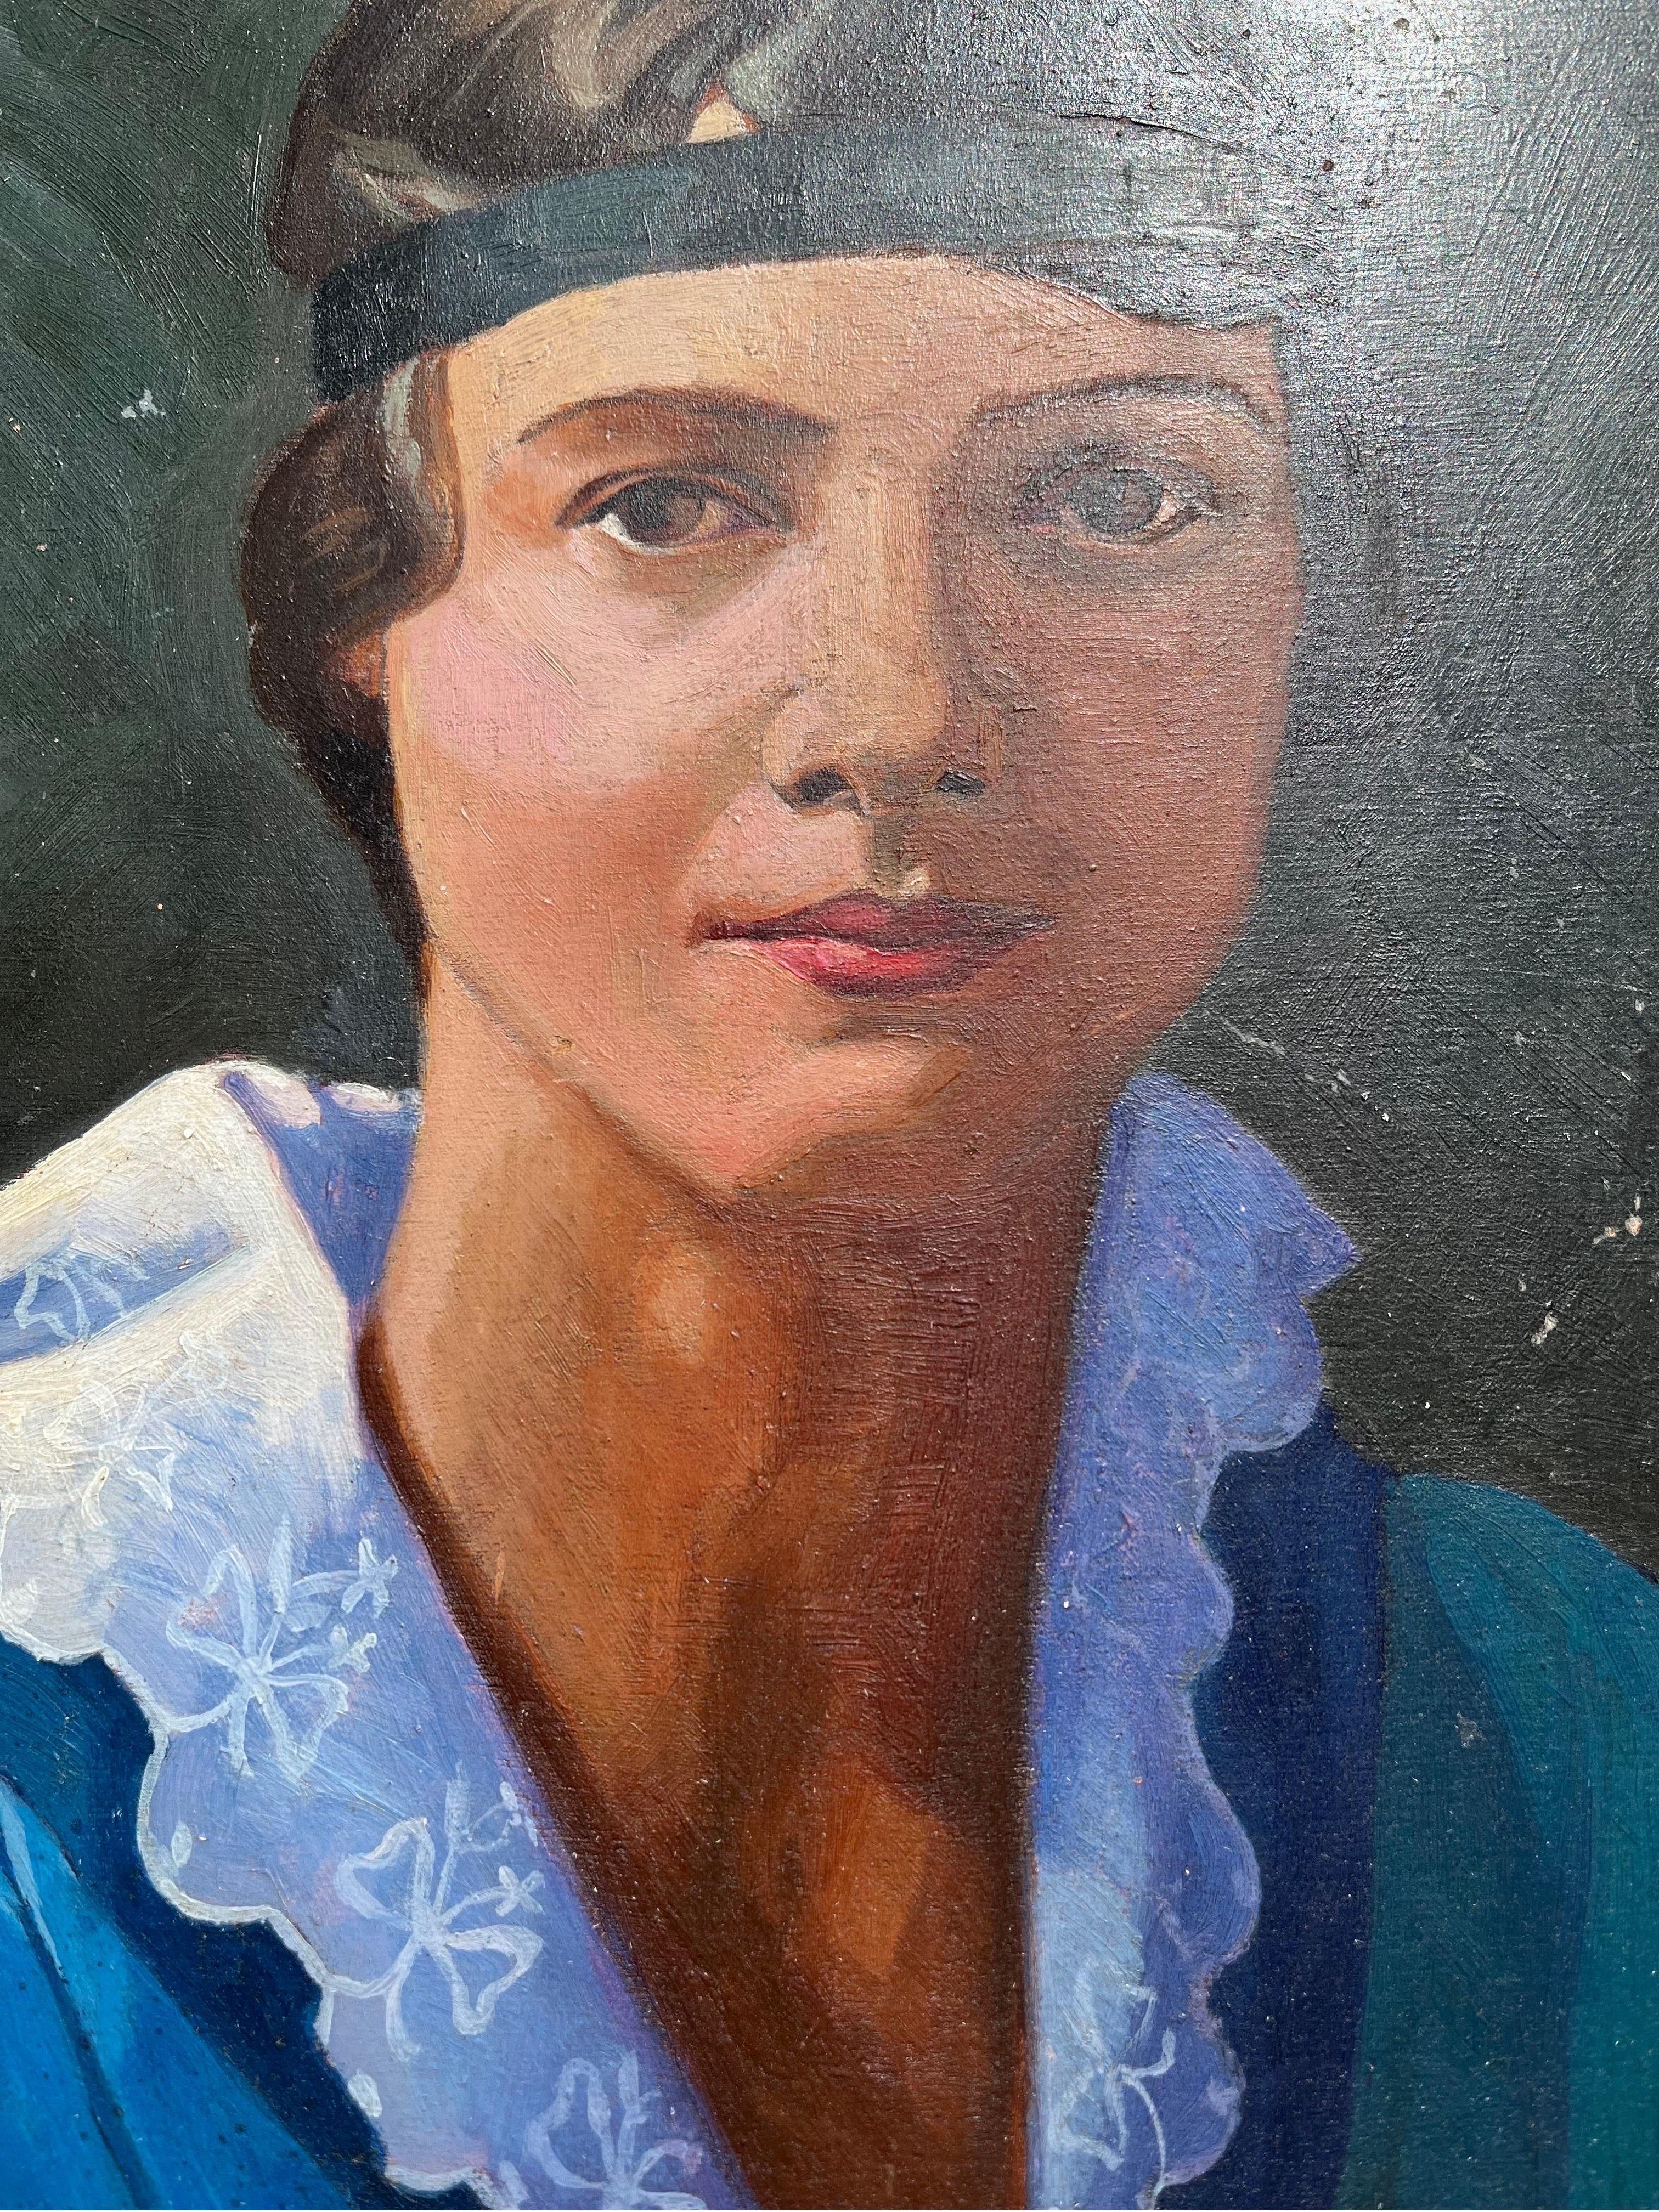 Very nice Portrait of a Lady on mohagony board 
signed, dated 1935

new frameless Swiss Corner clip hanging system - ready to hang

A nice resemblence to  Emilia Earhart.